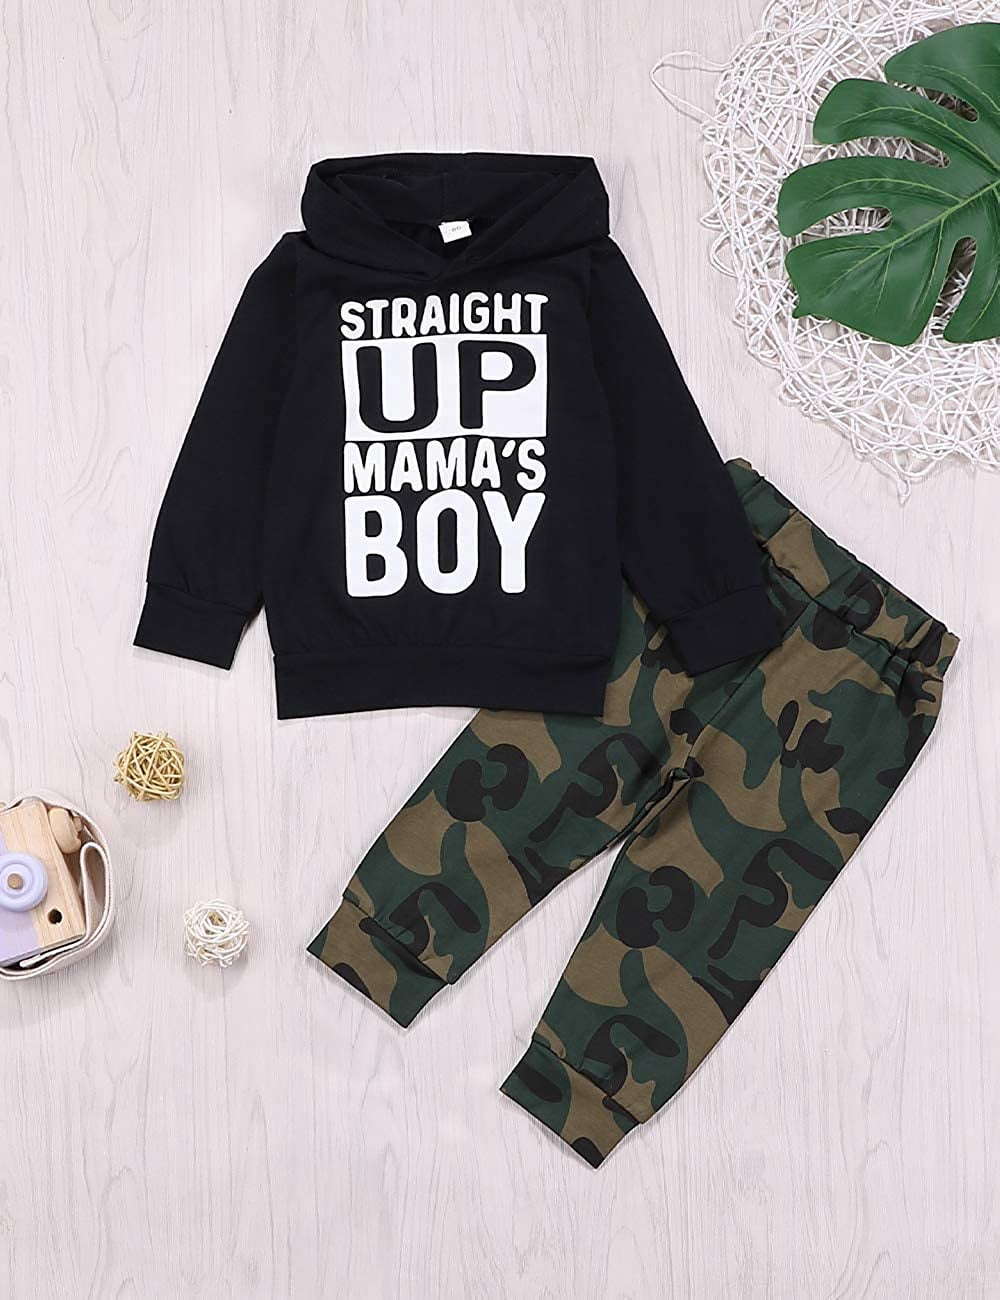 Seyouag Toddler Baby Boys Clothes Straight Up Mama's Boy T-Shirt and Pants Sweatsuit Pants Outfit Set 